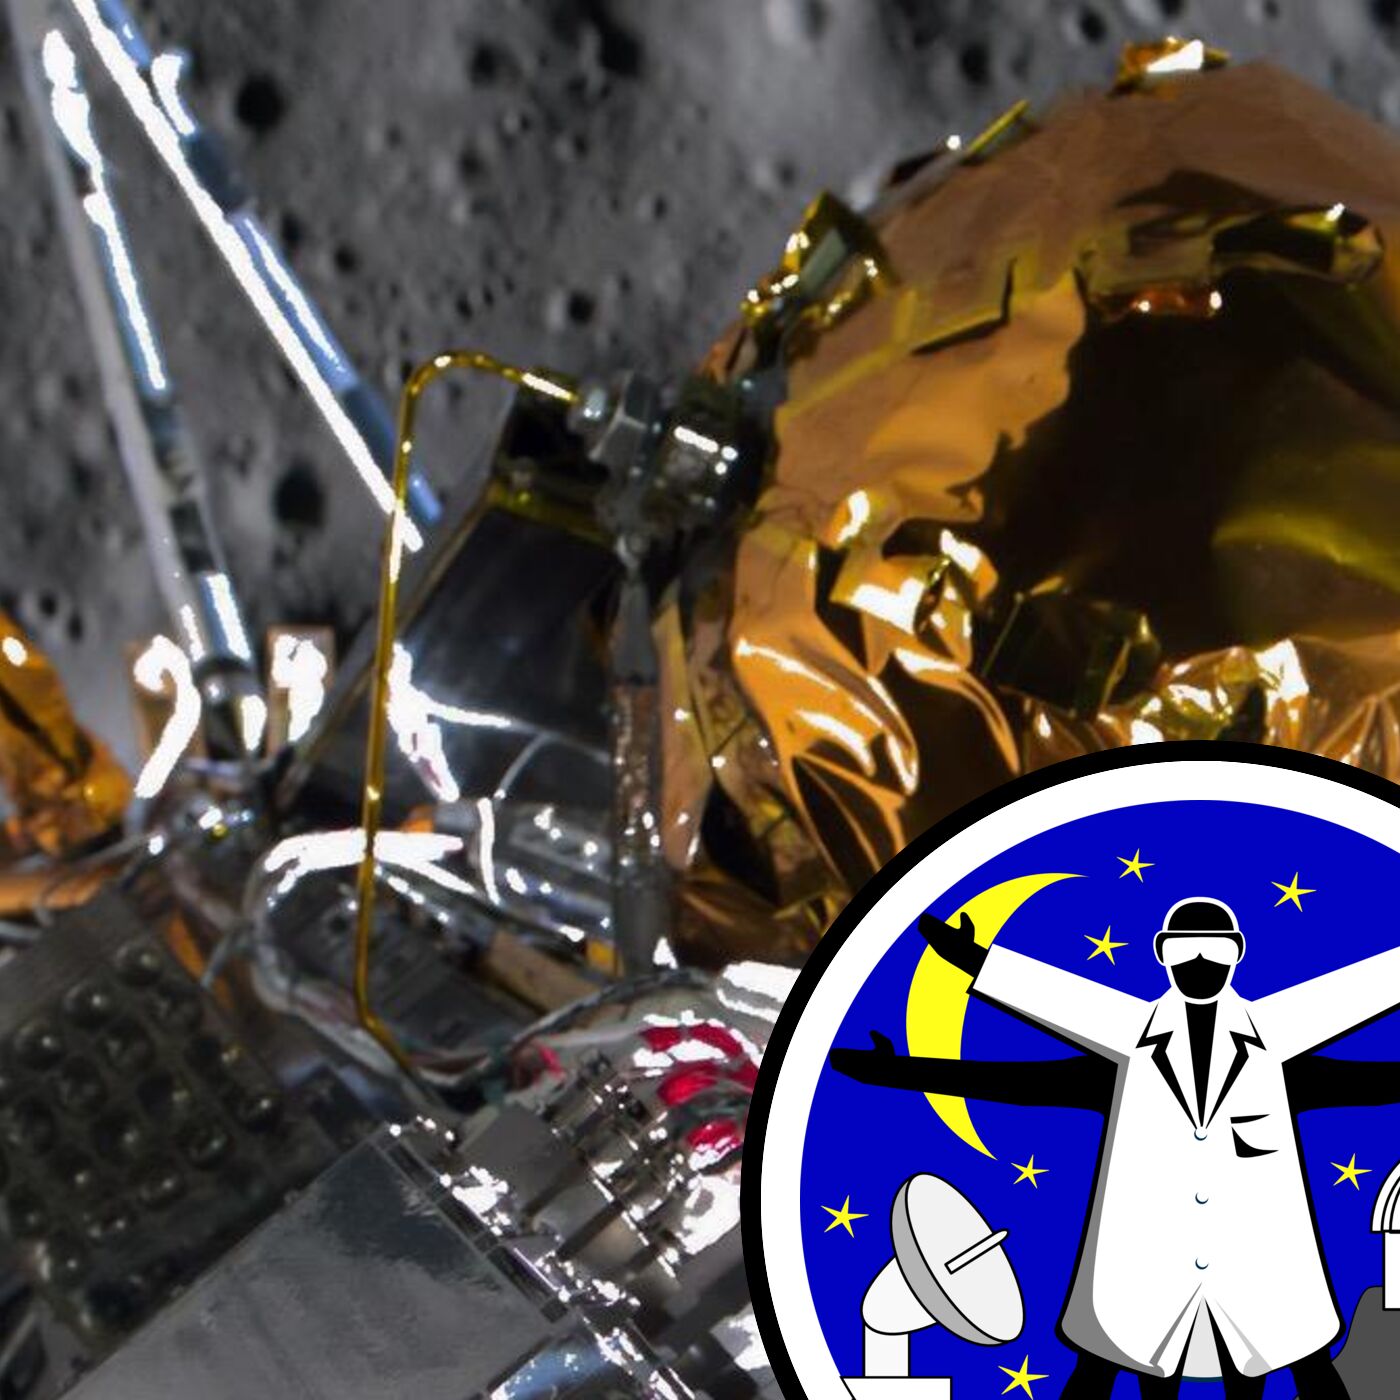 America’s return to the Moon and UK lunar ambitions